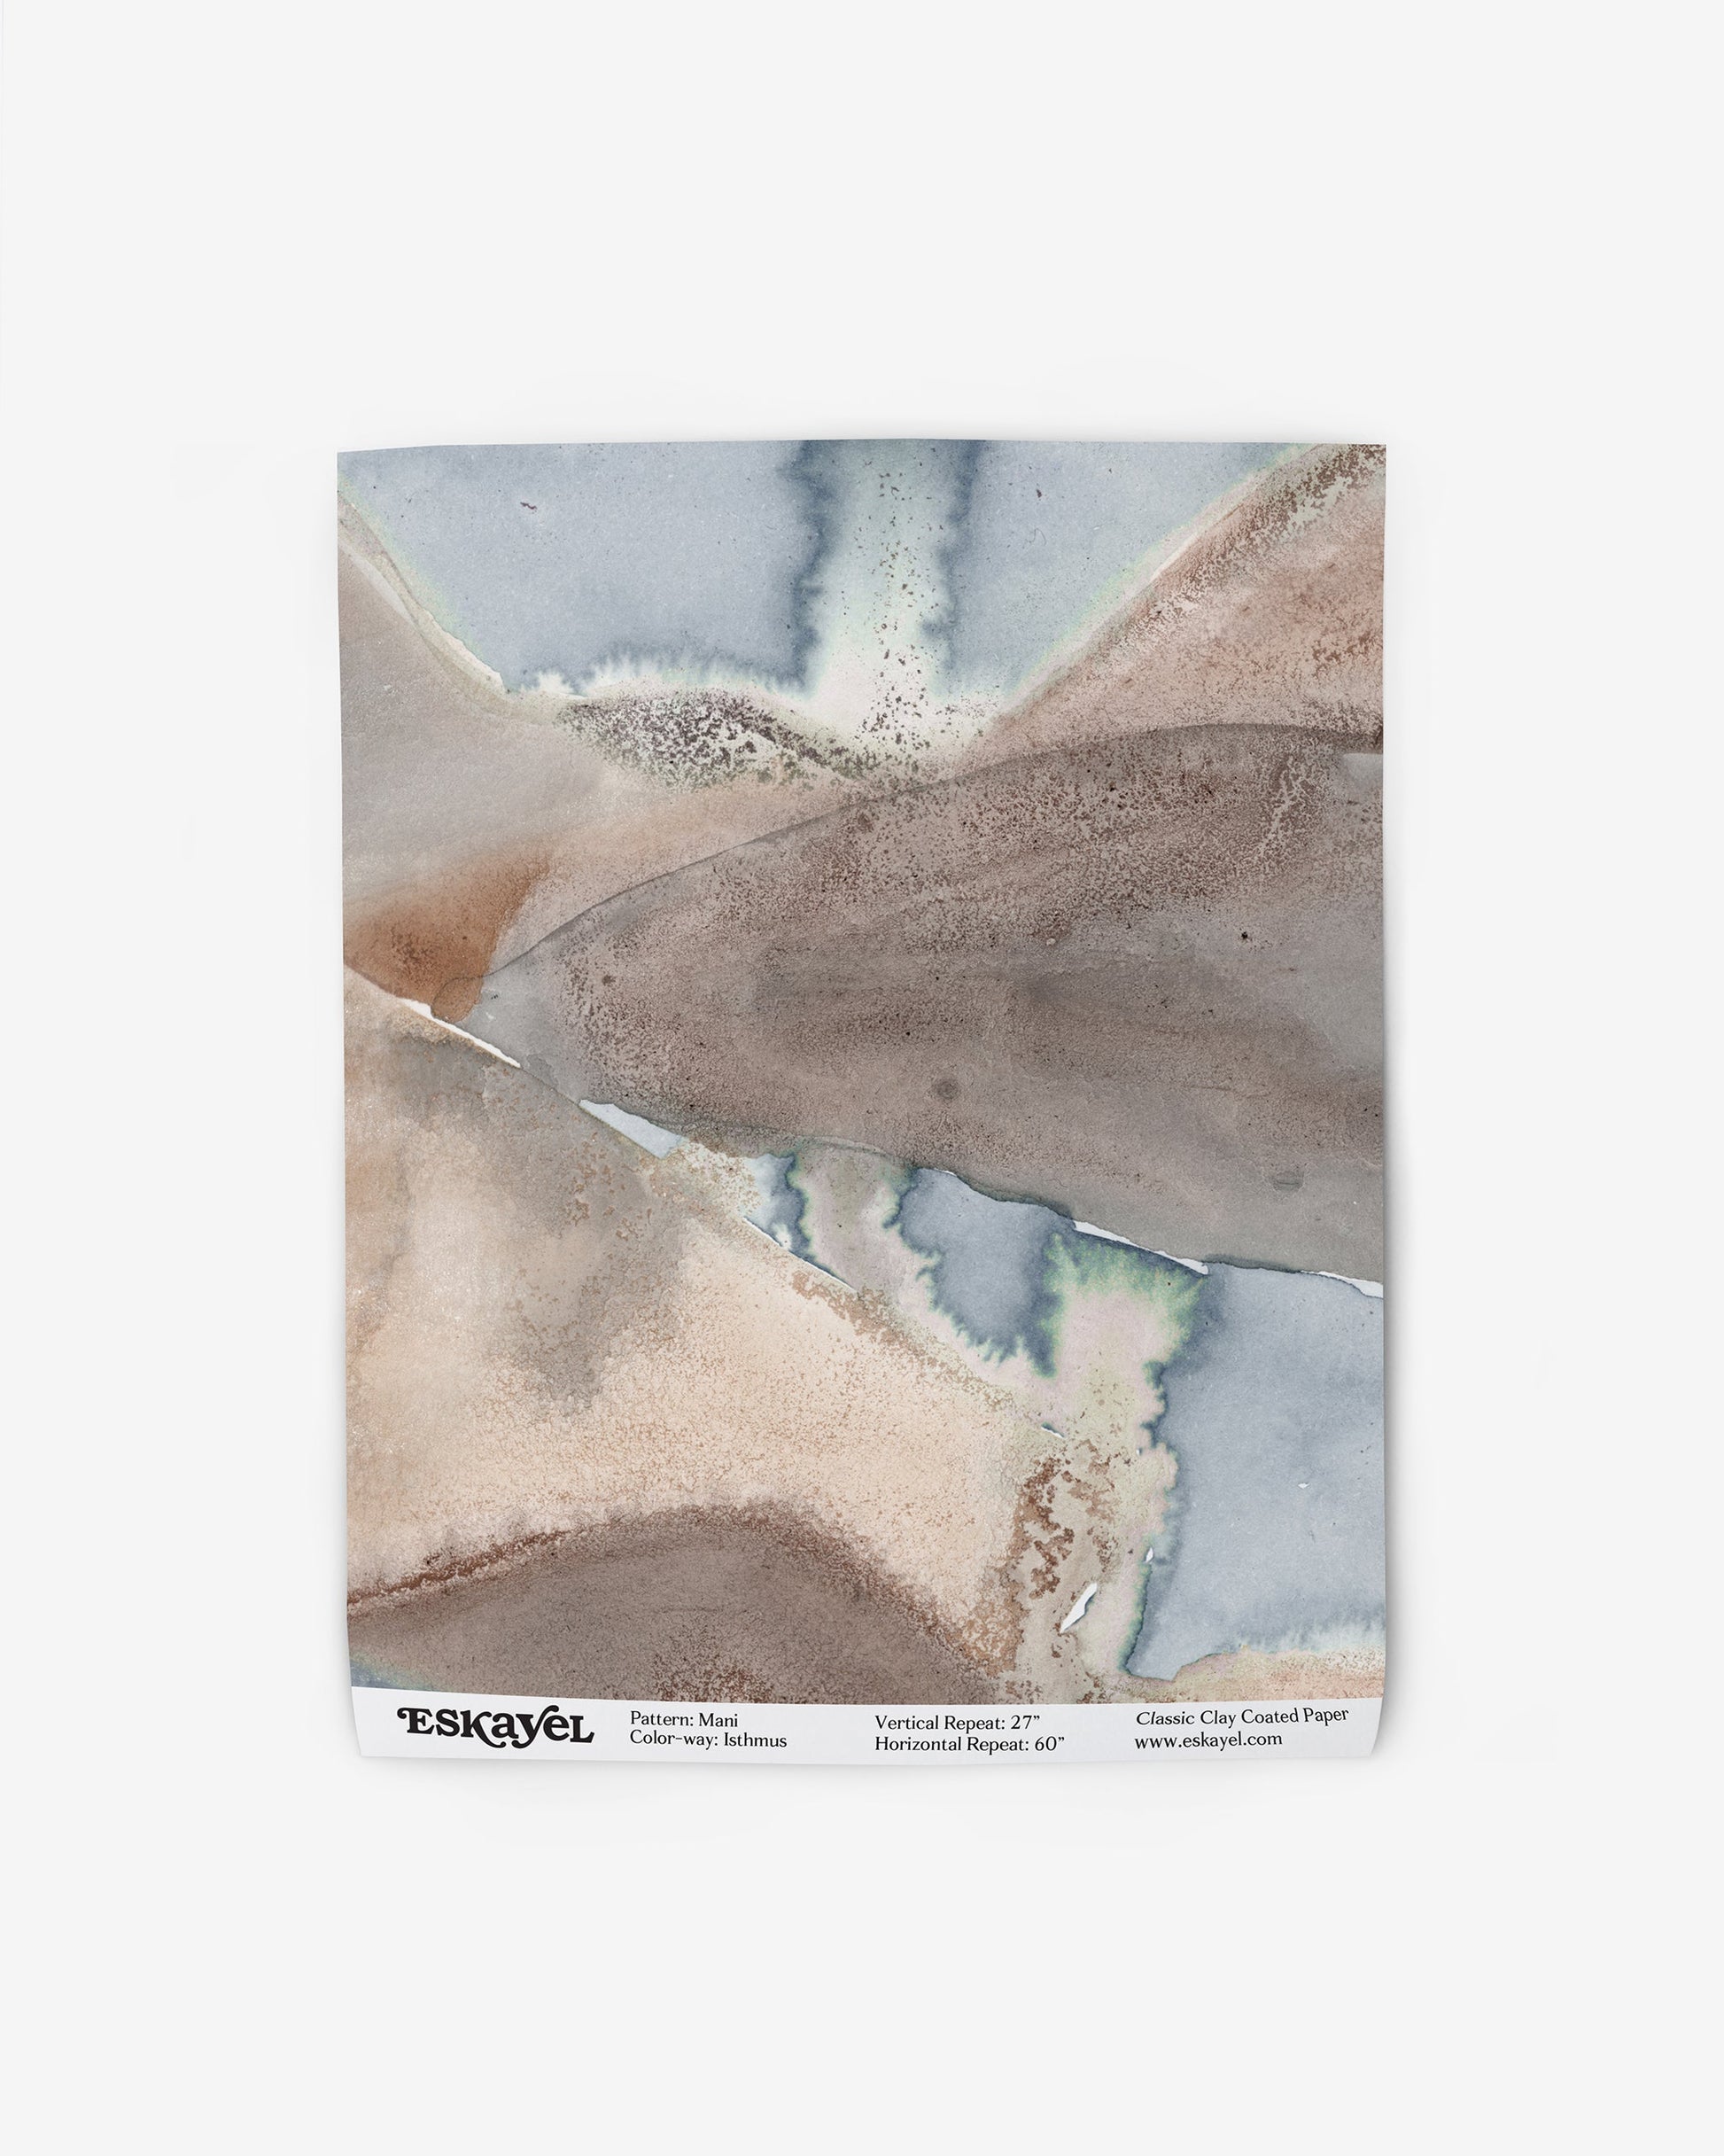 To a Mani Wallpaper Sample Isthmus, choose a wallpaper with an image of a river and sand